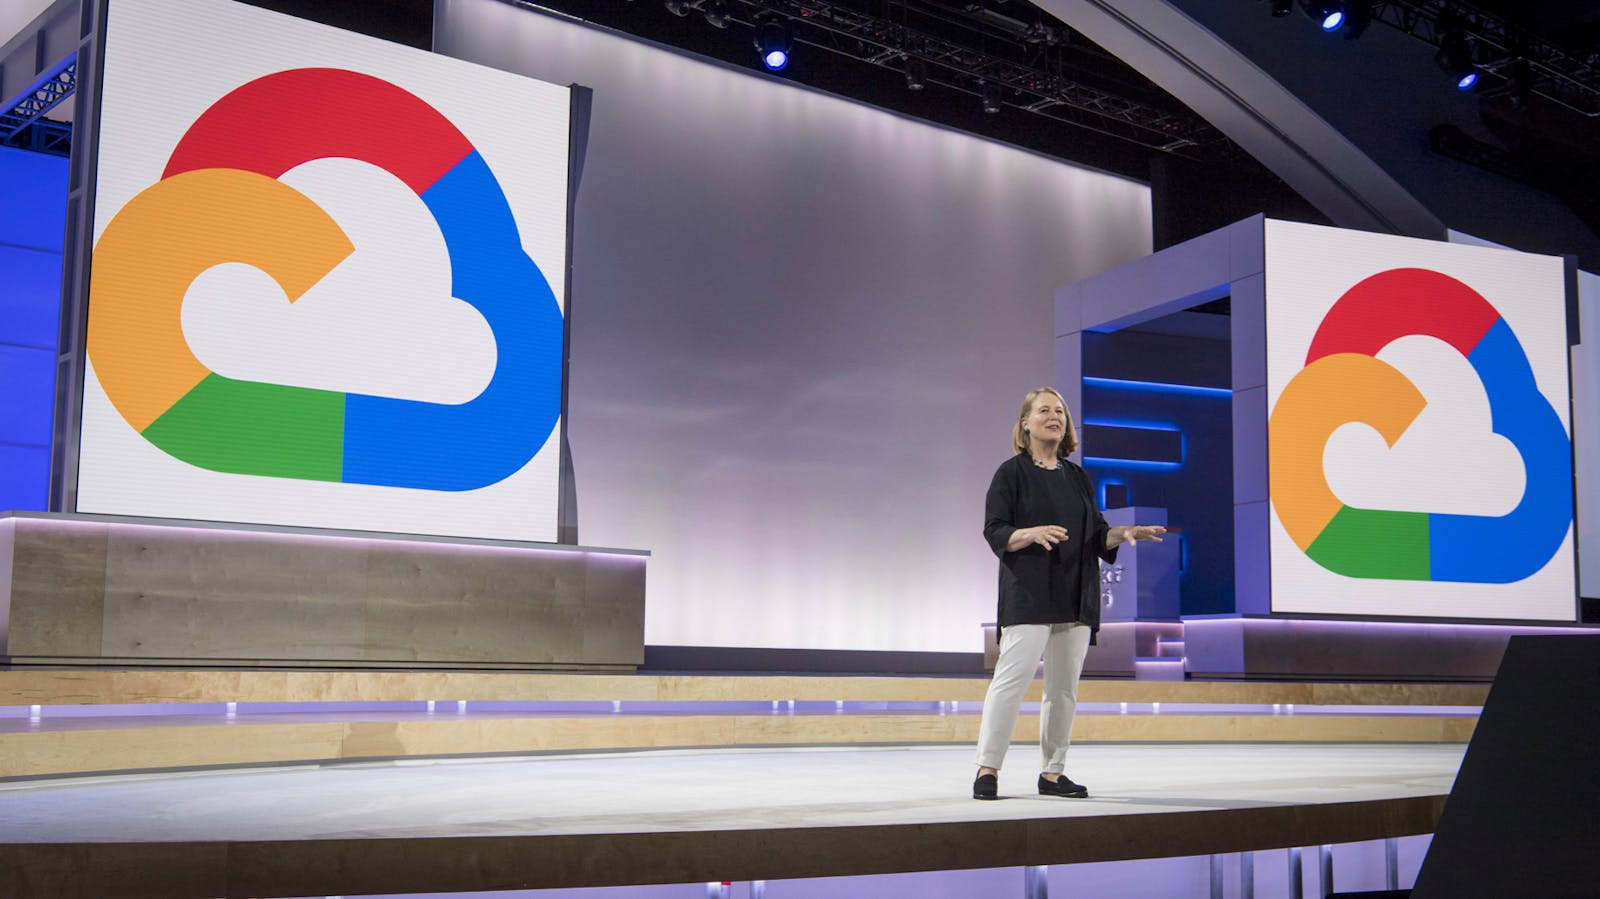 Diane Greene, CEO of Google Cloud, speaking at an event in July. Photo by Bloomberg